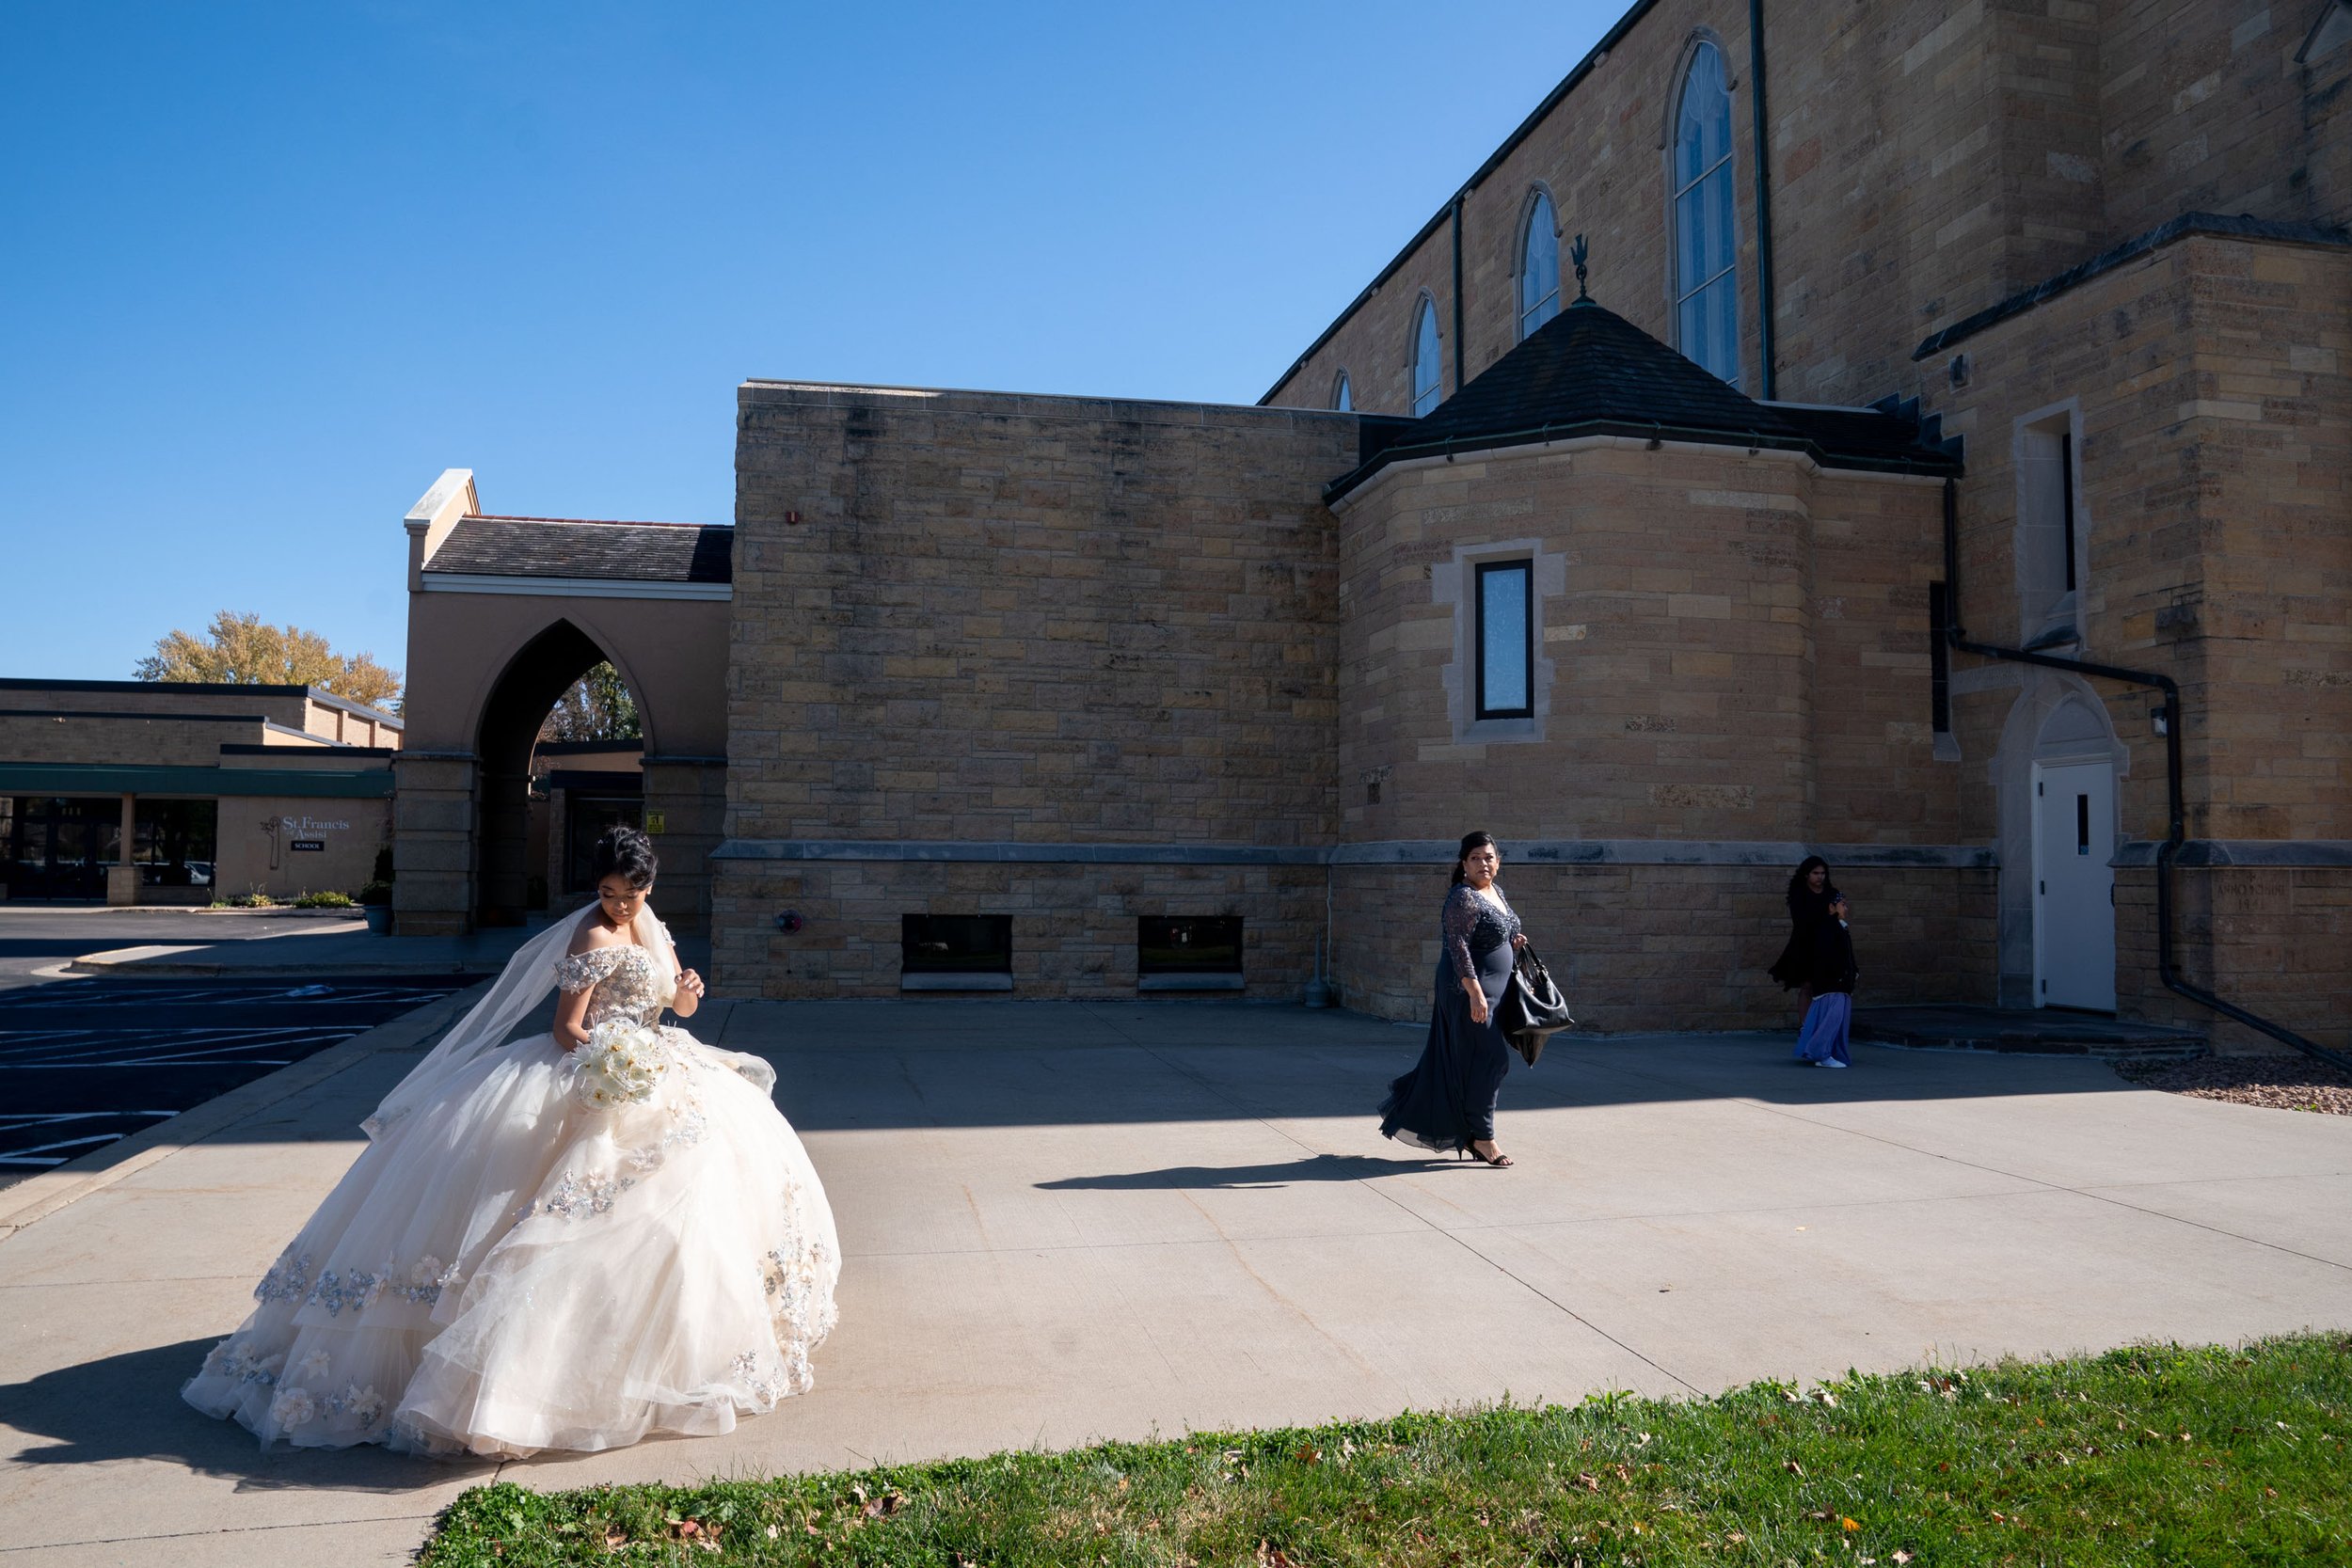  Camila Avilez, 15, walks outside of St. Francis of Assisi Catholic Church for her quinceañera service Oct. 15, 2022 in Rochester, Minn. A quinceañera, which has cultural roots in Mexico, is often both a religious and social ceremony celebrating a gi